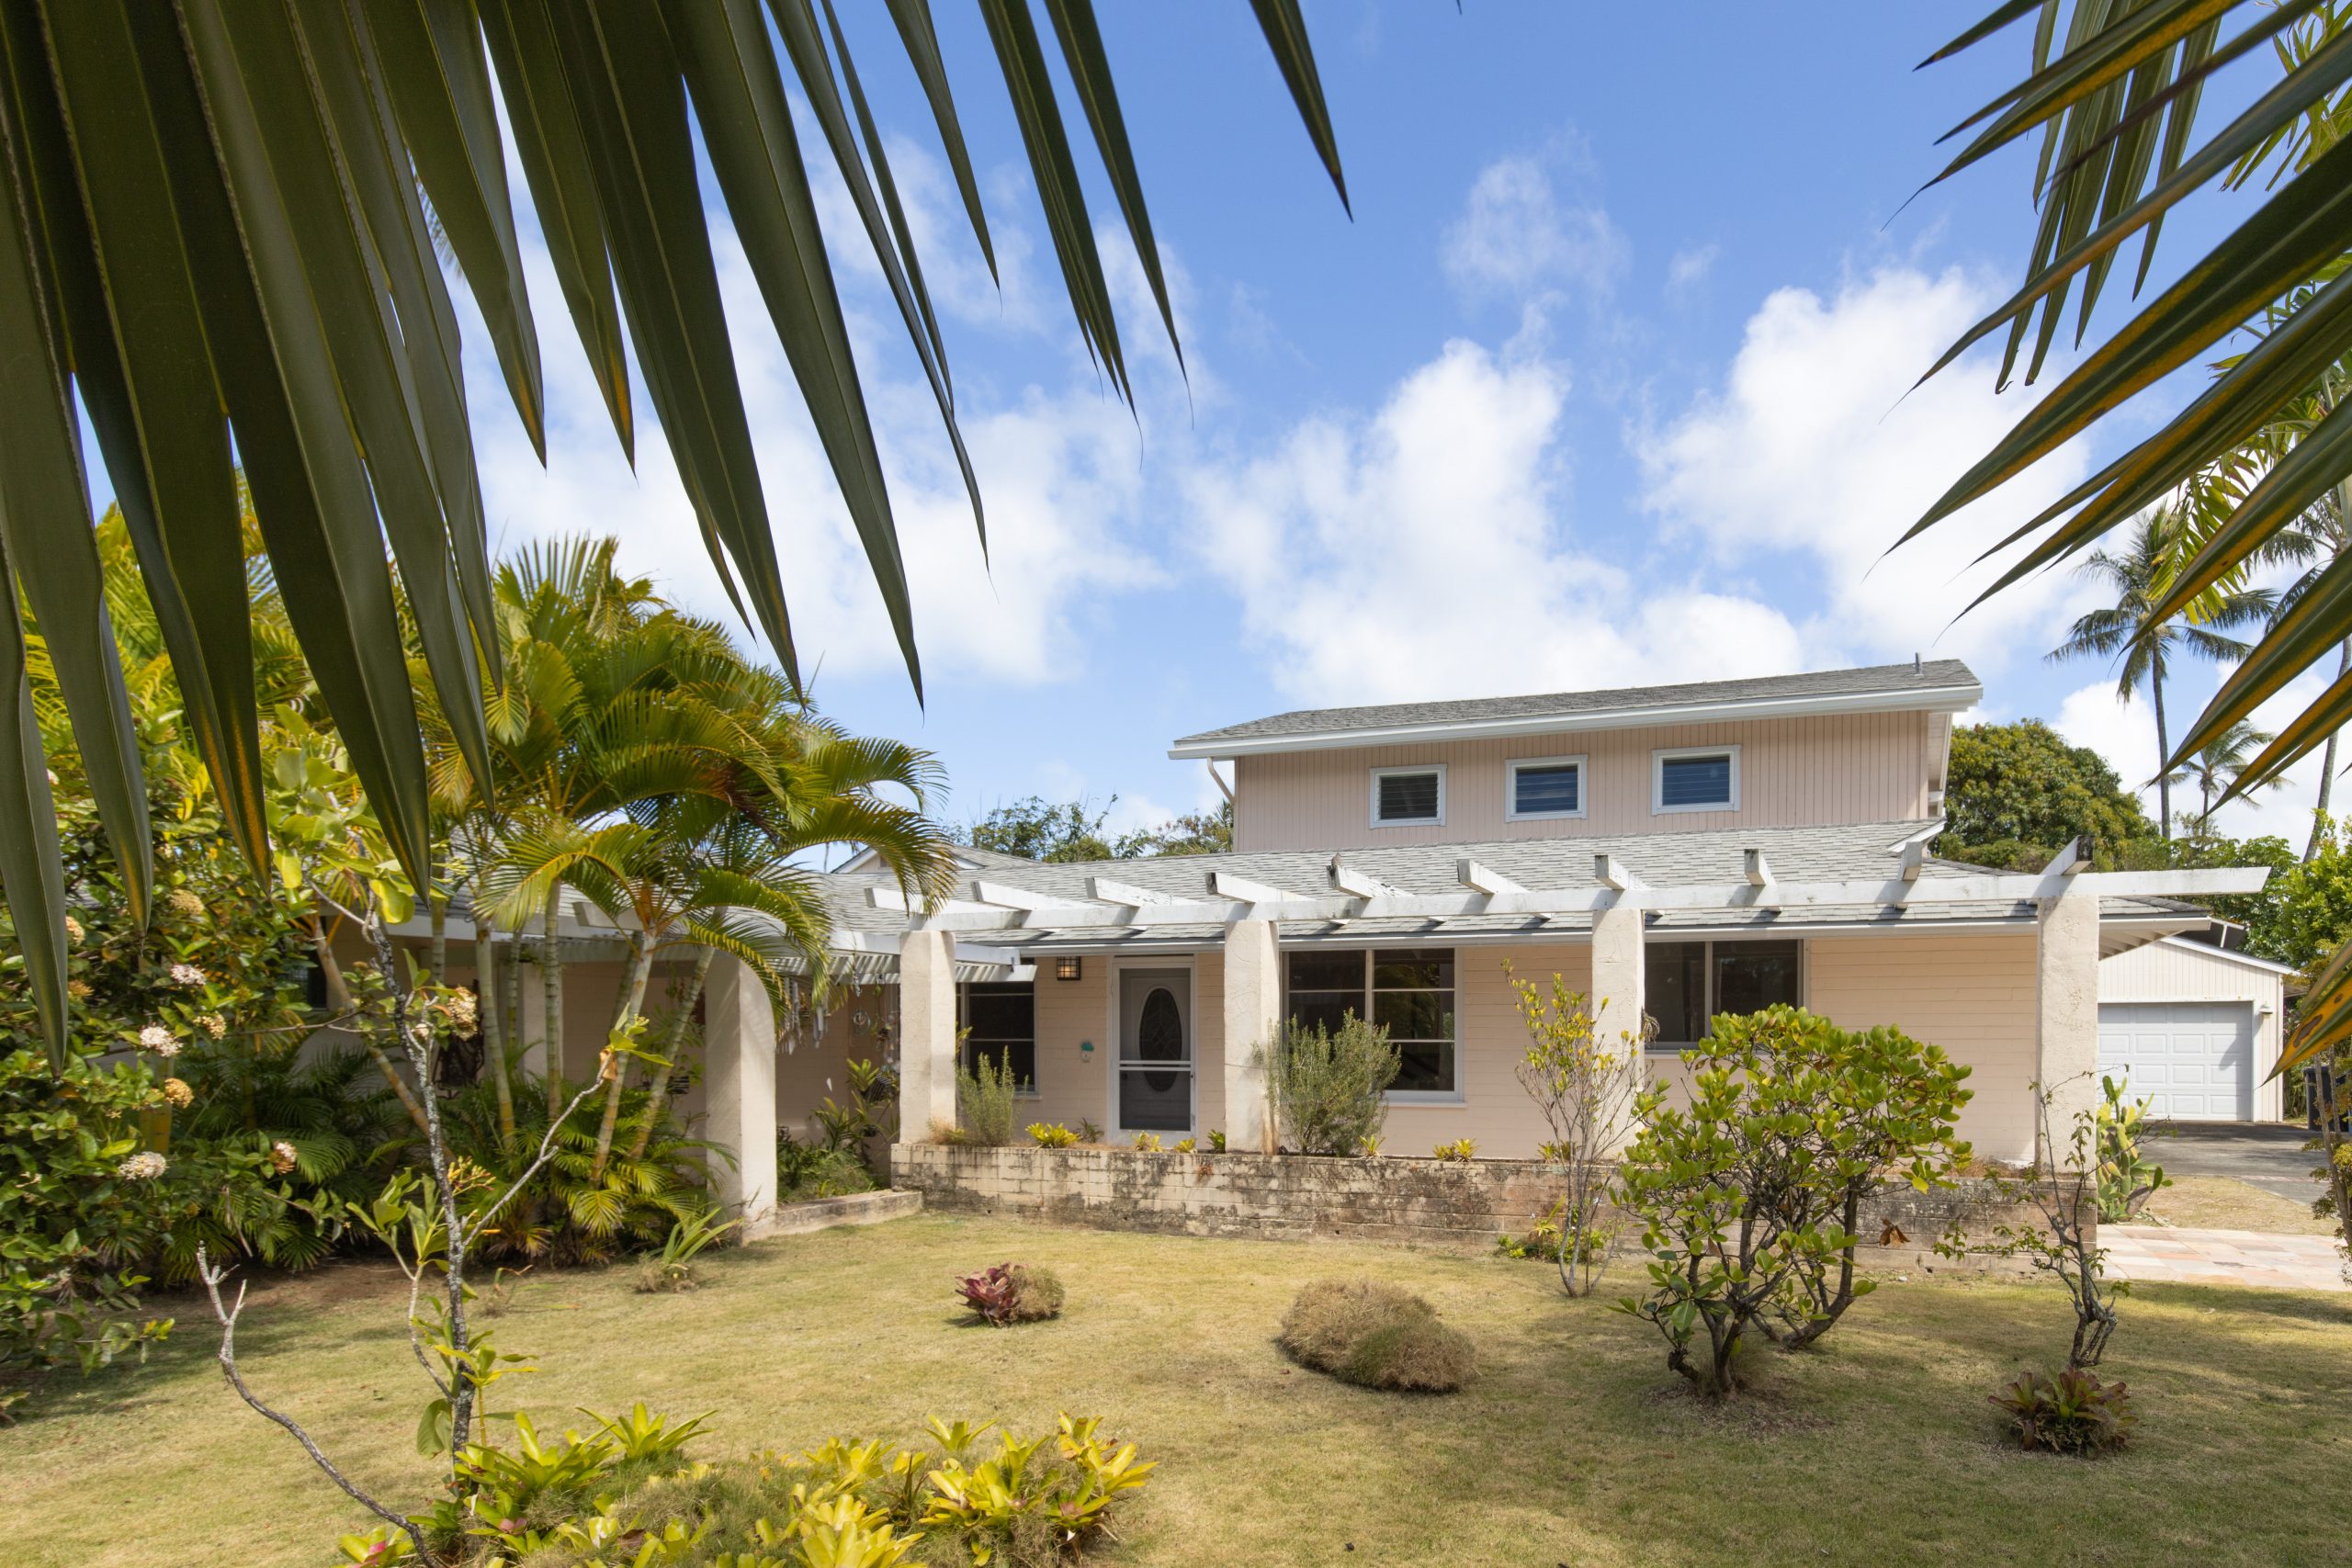 One of the most desirable neighborhoods in Kailua!